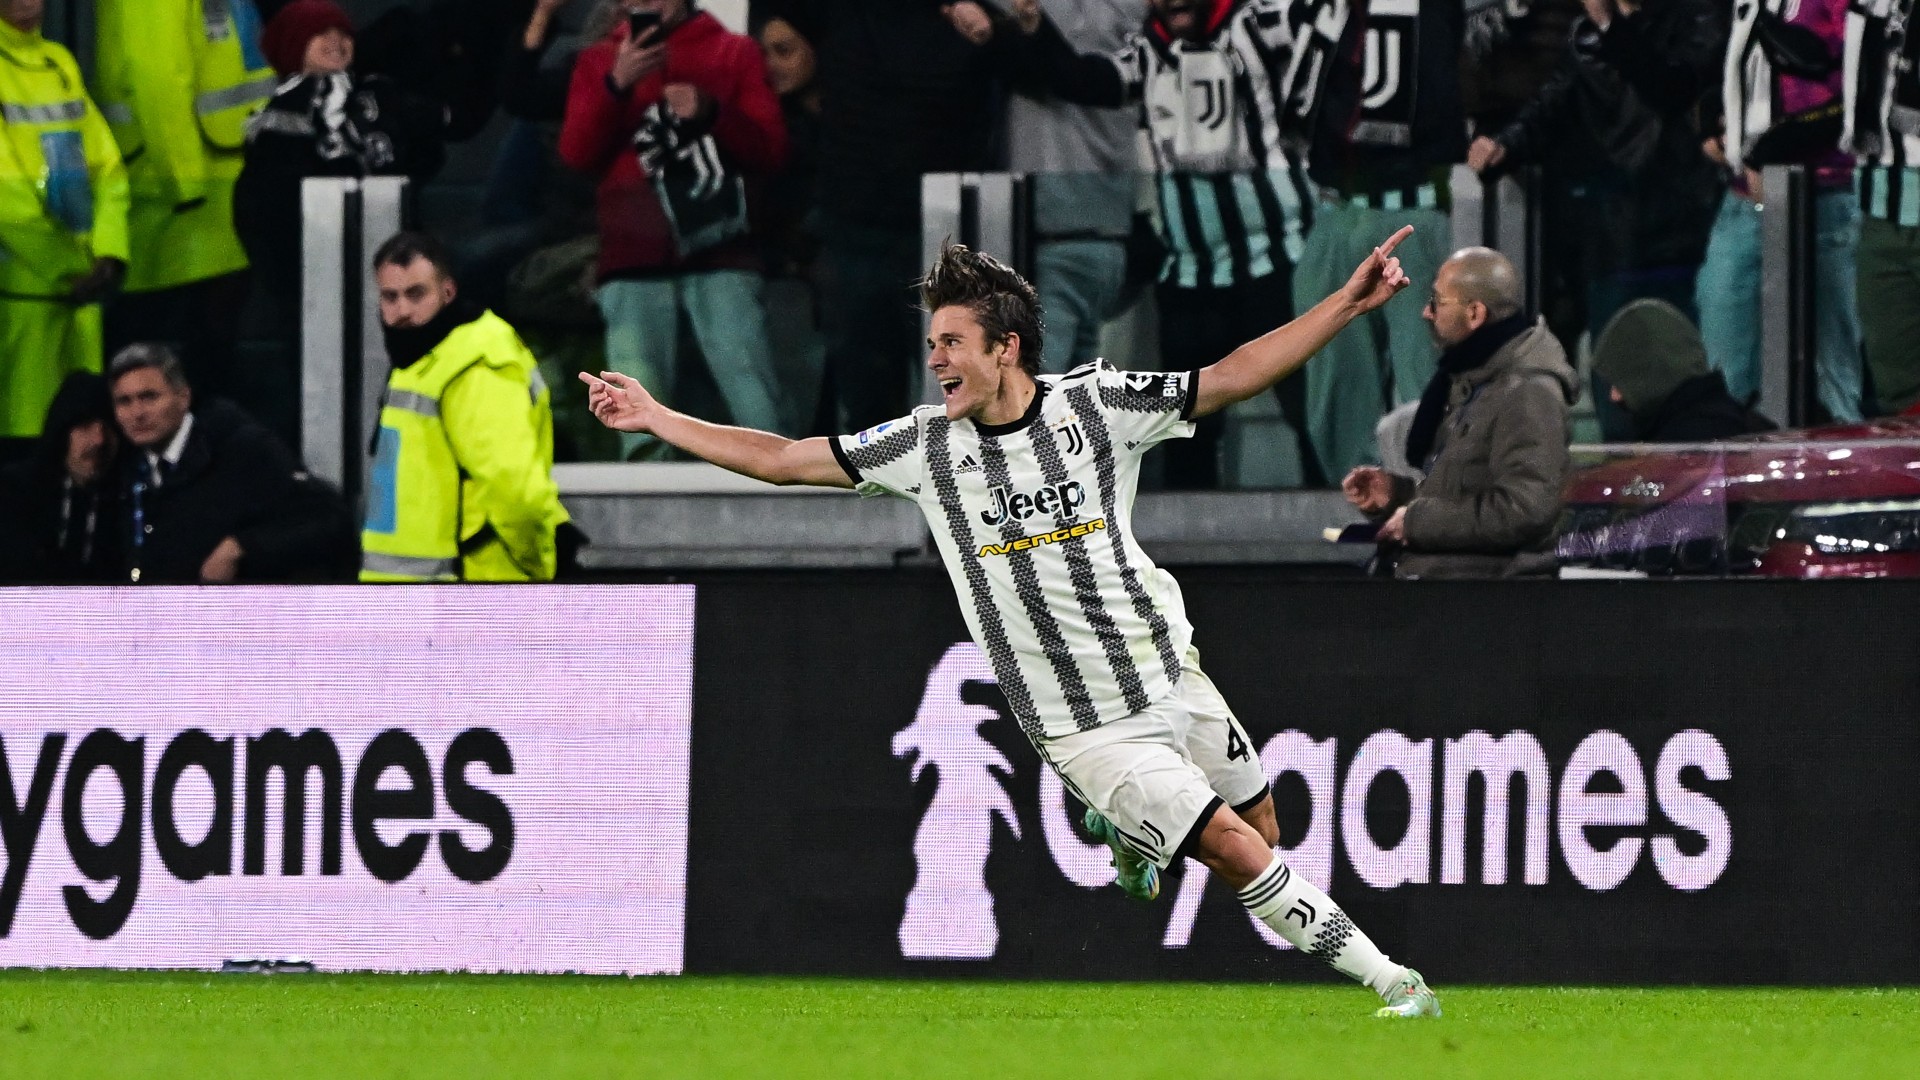 Juventus 2-0 Inter: Fagioli scores on first Serie A start as Bianconeri win  Derby d'Italia